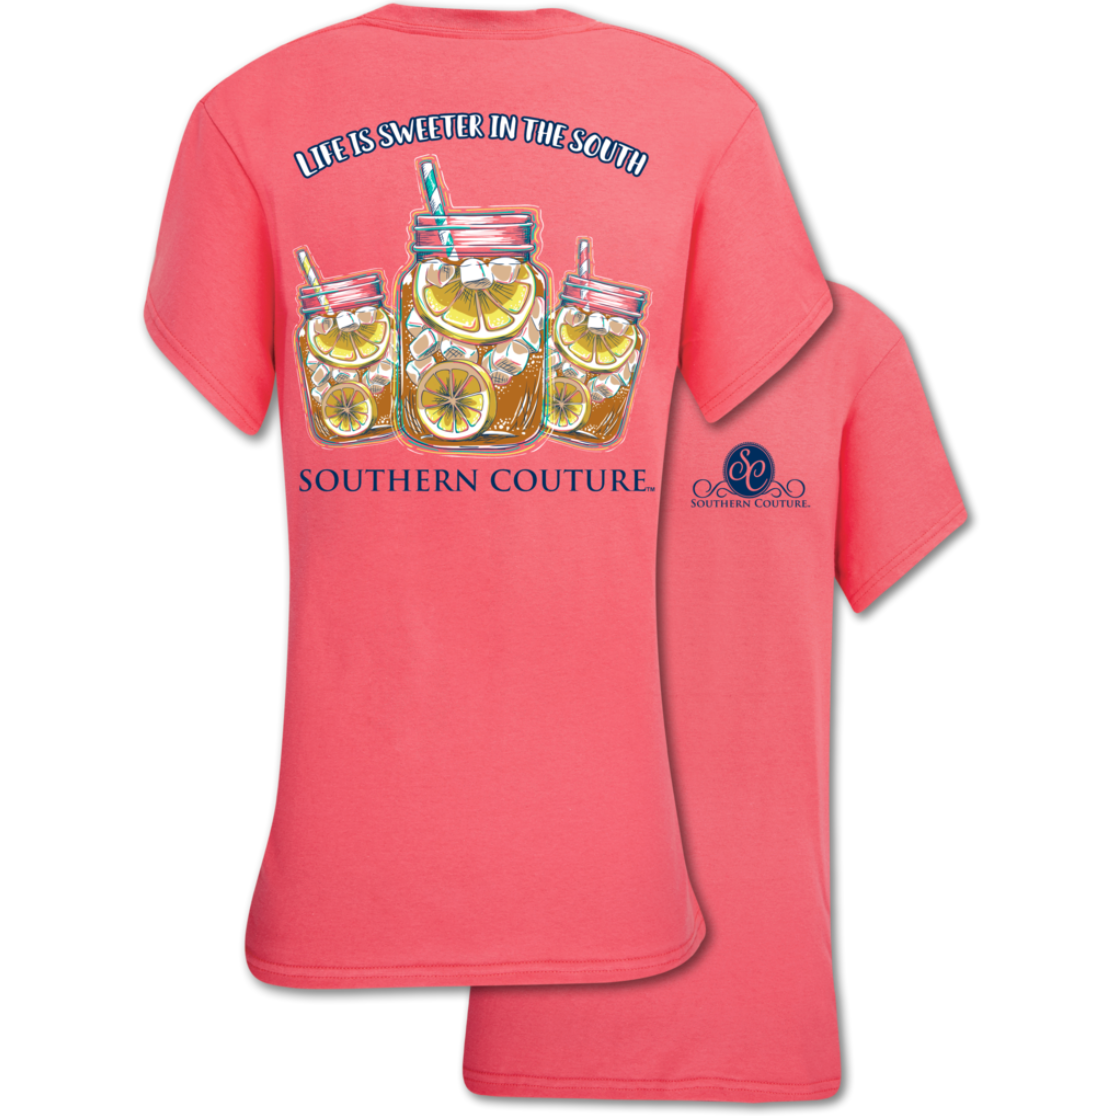 Southern Couture "Sweeter In The South" Ladies T